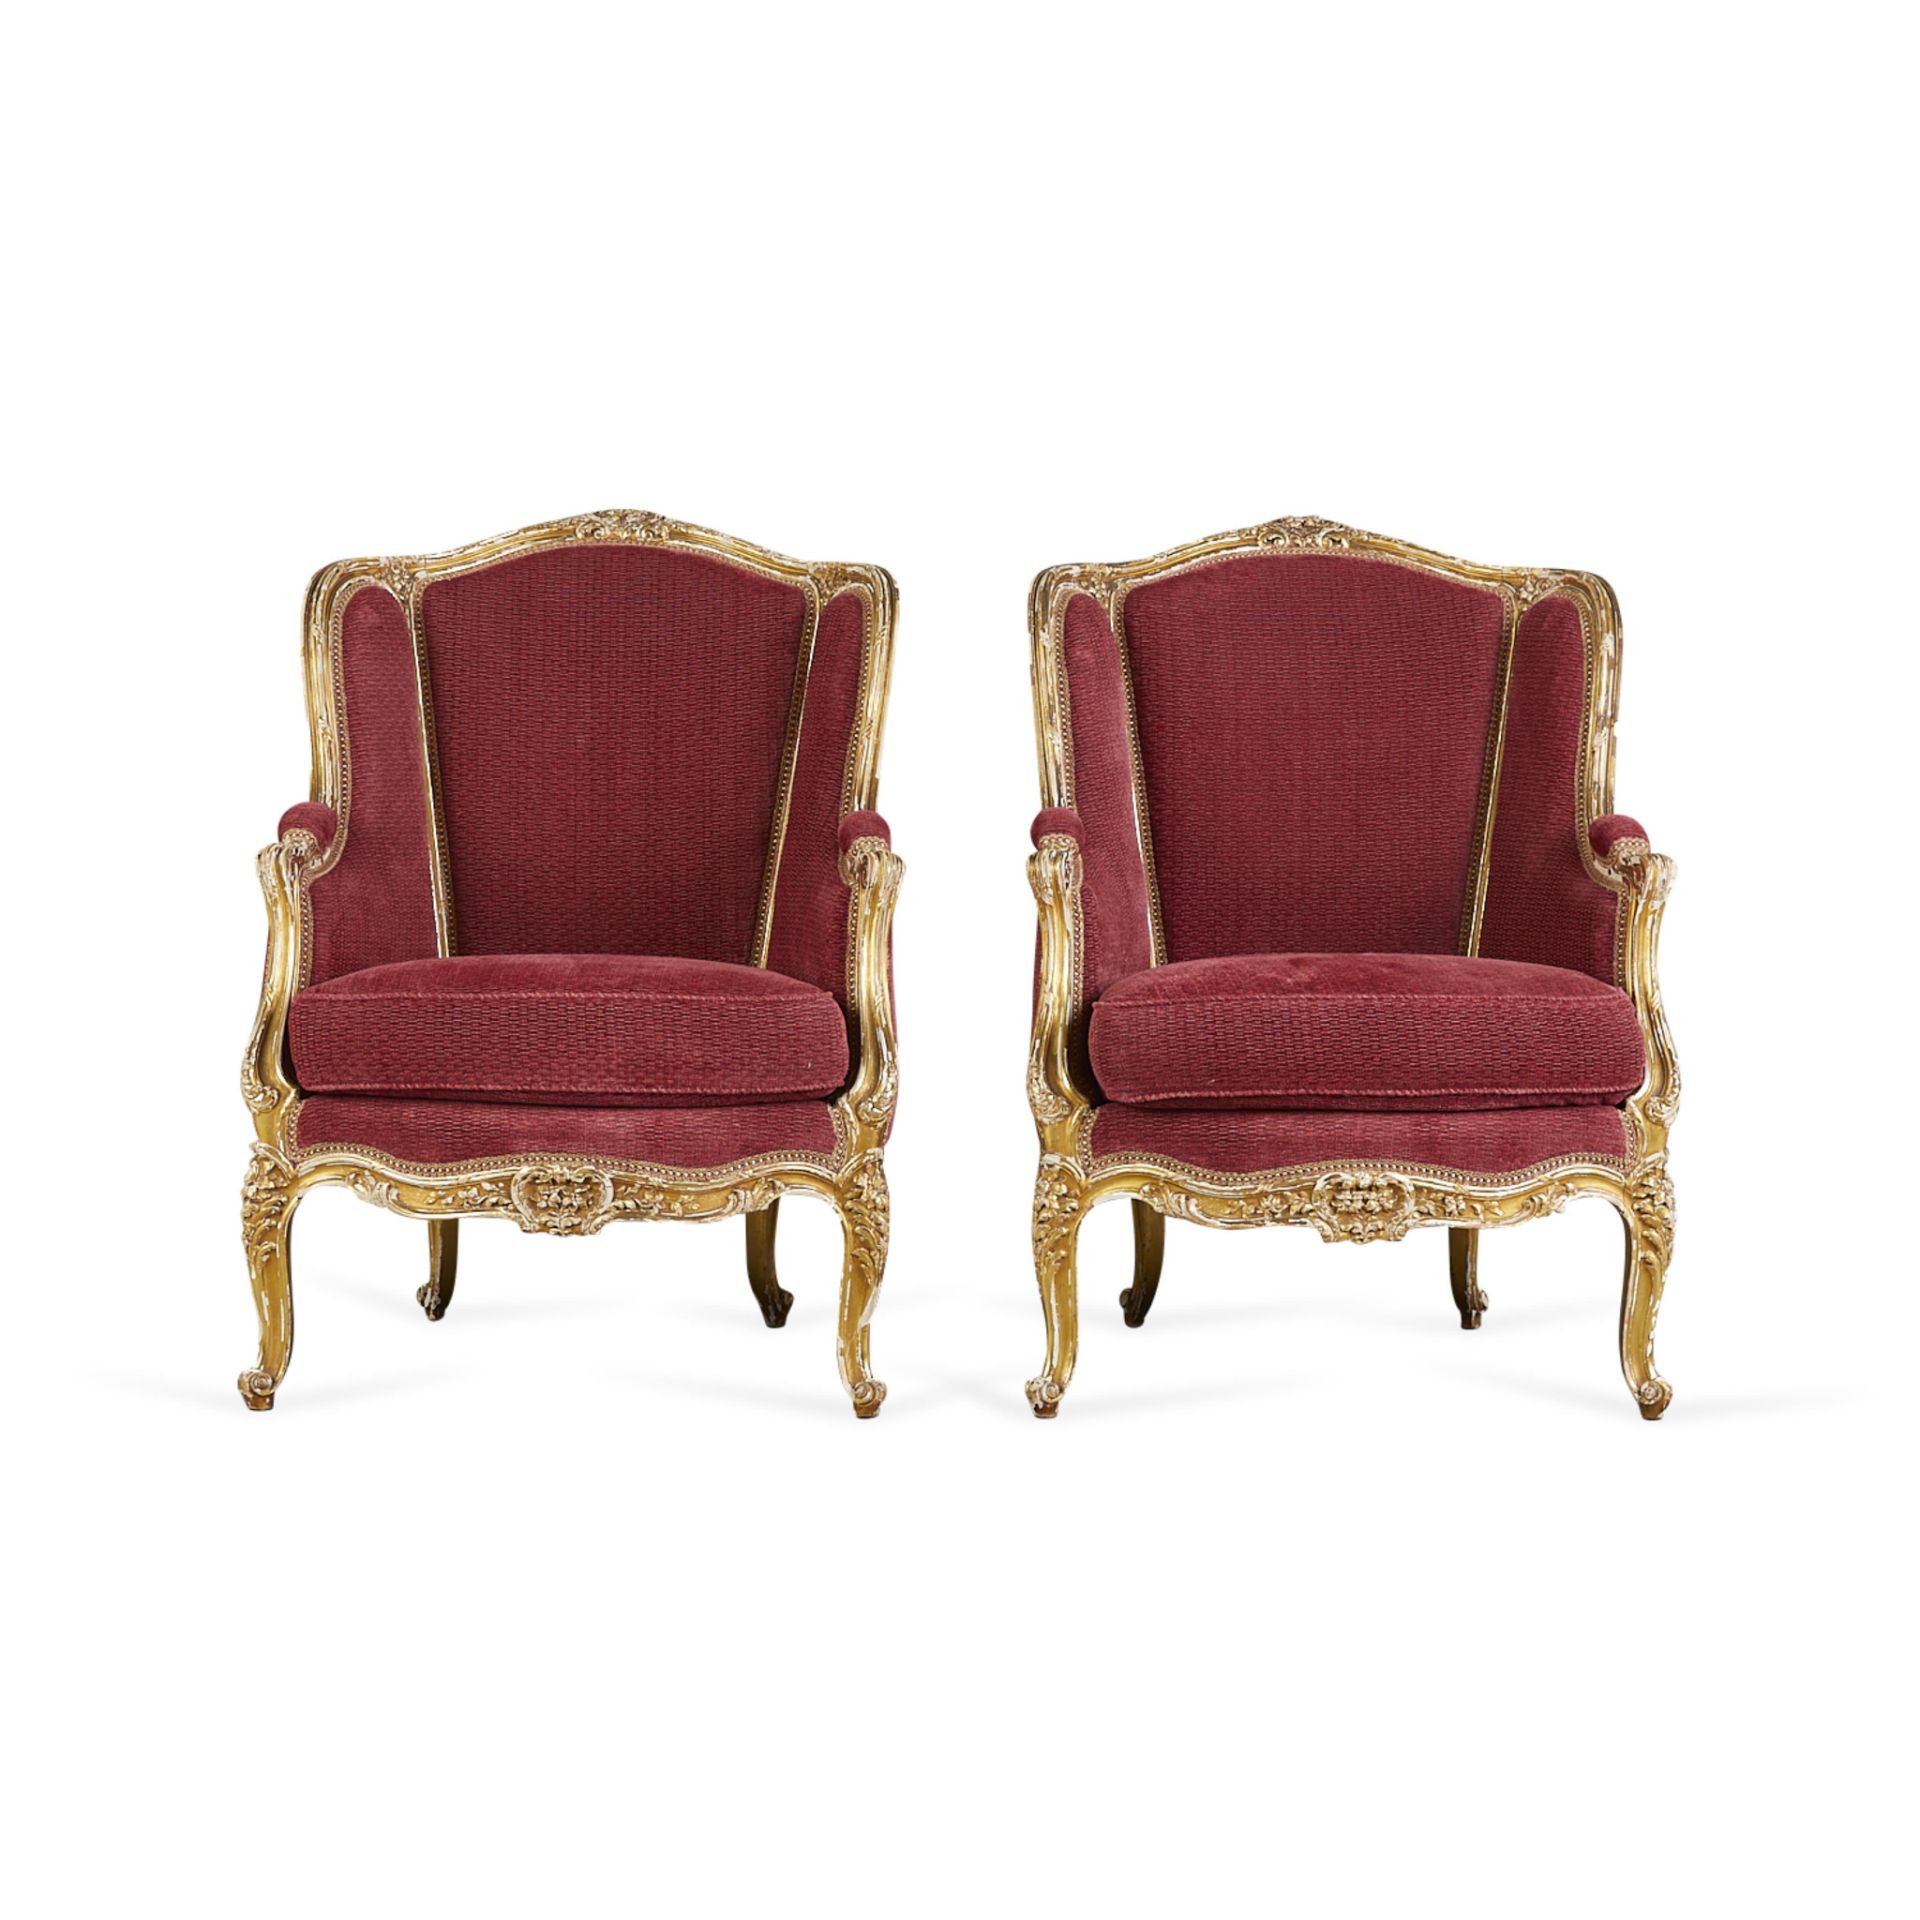 Pair of Louis XV Style Gilt Armchairs - Image 4 of 12